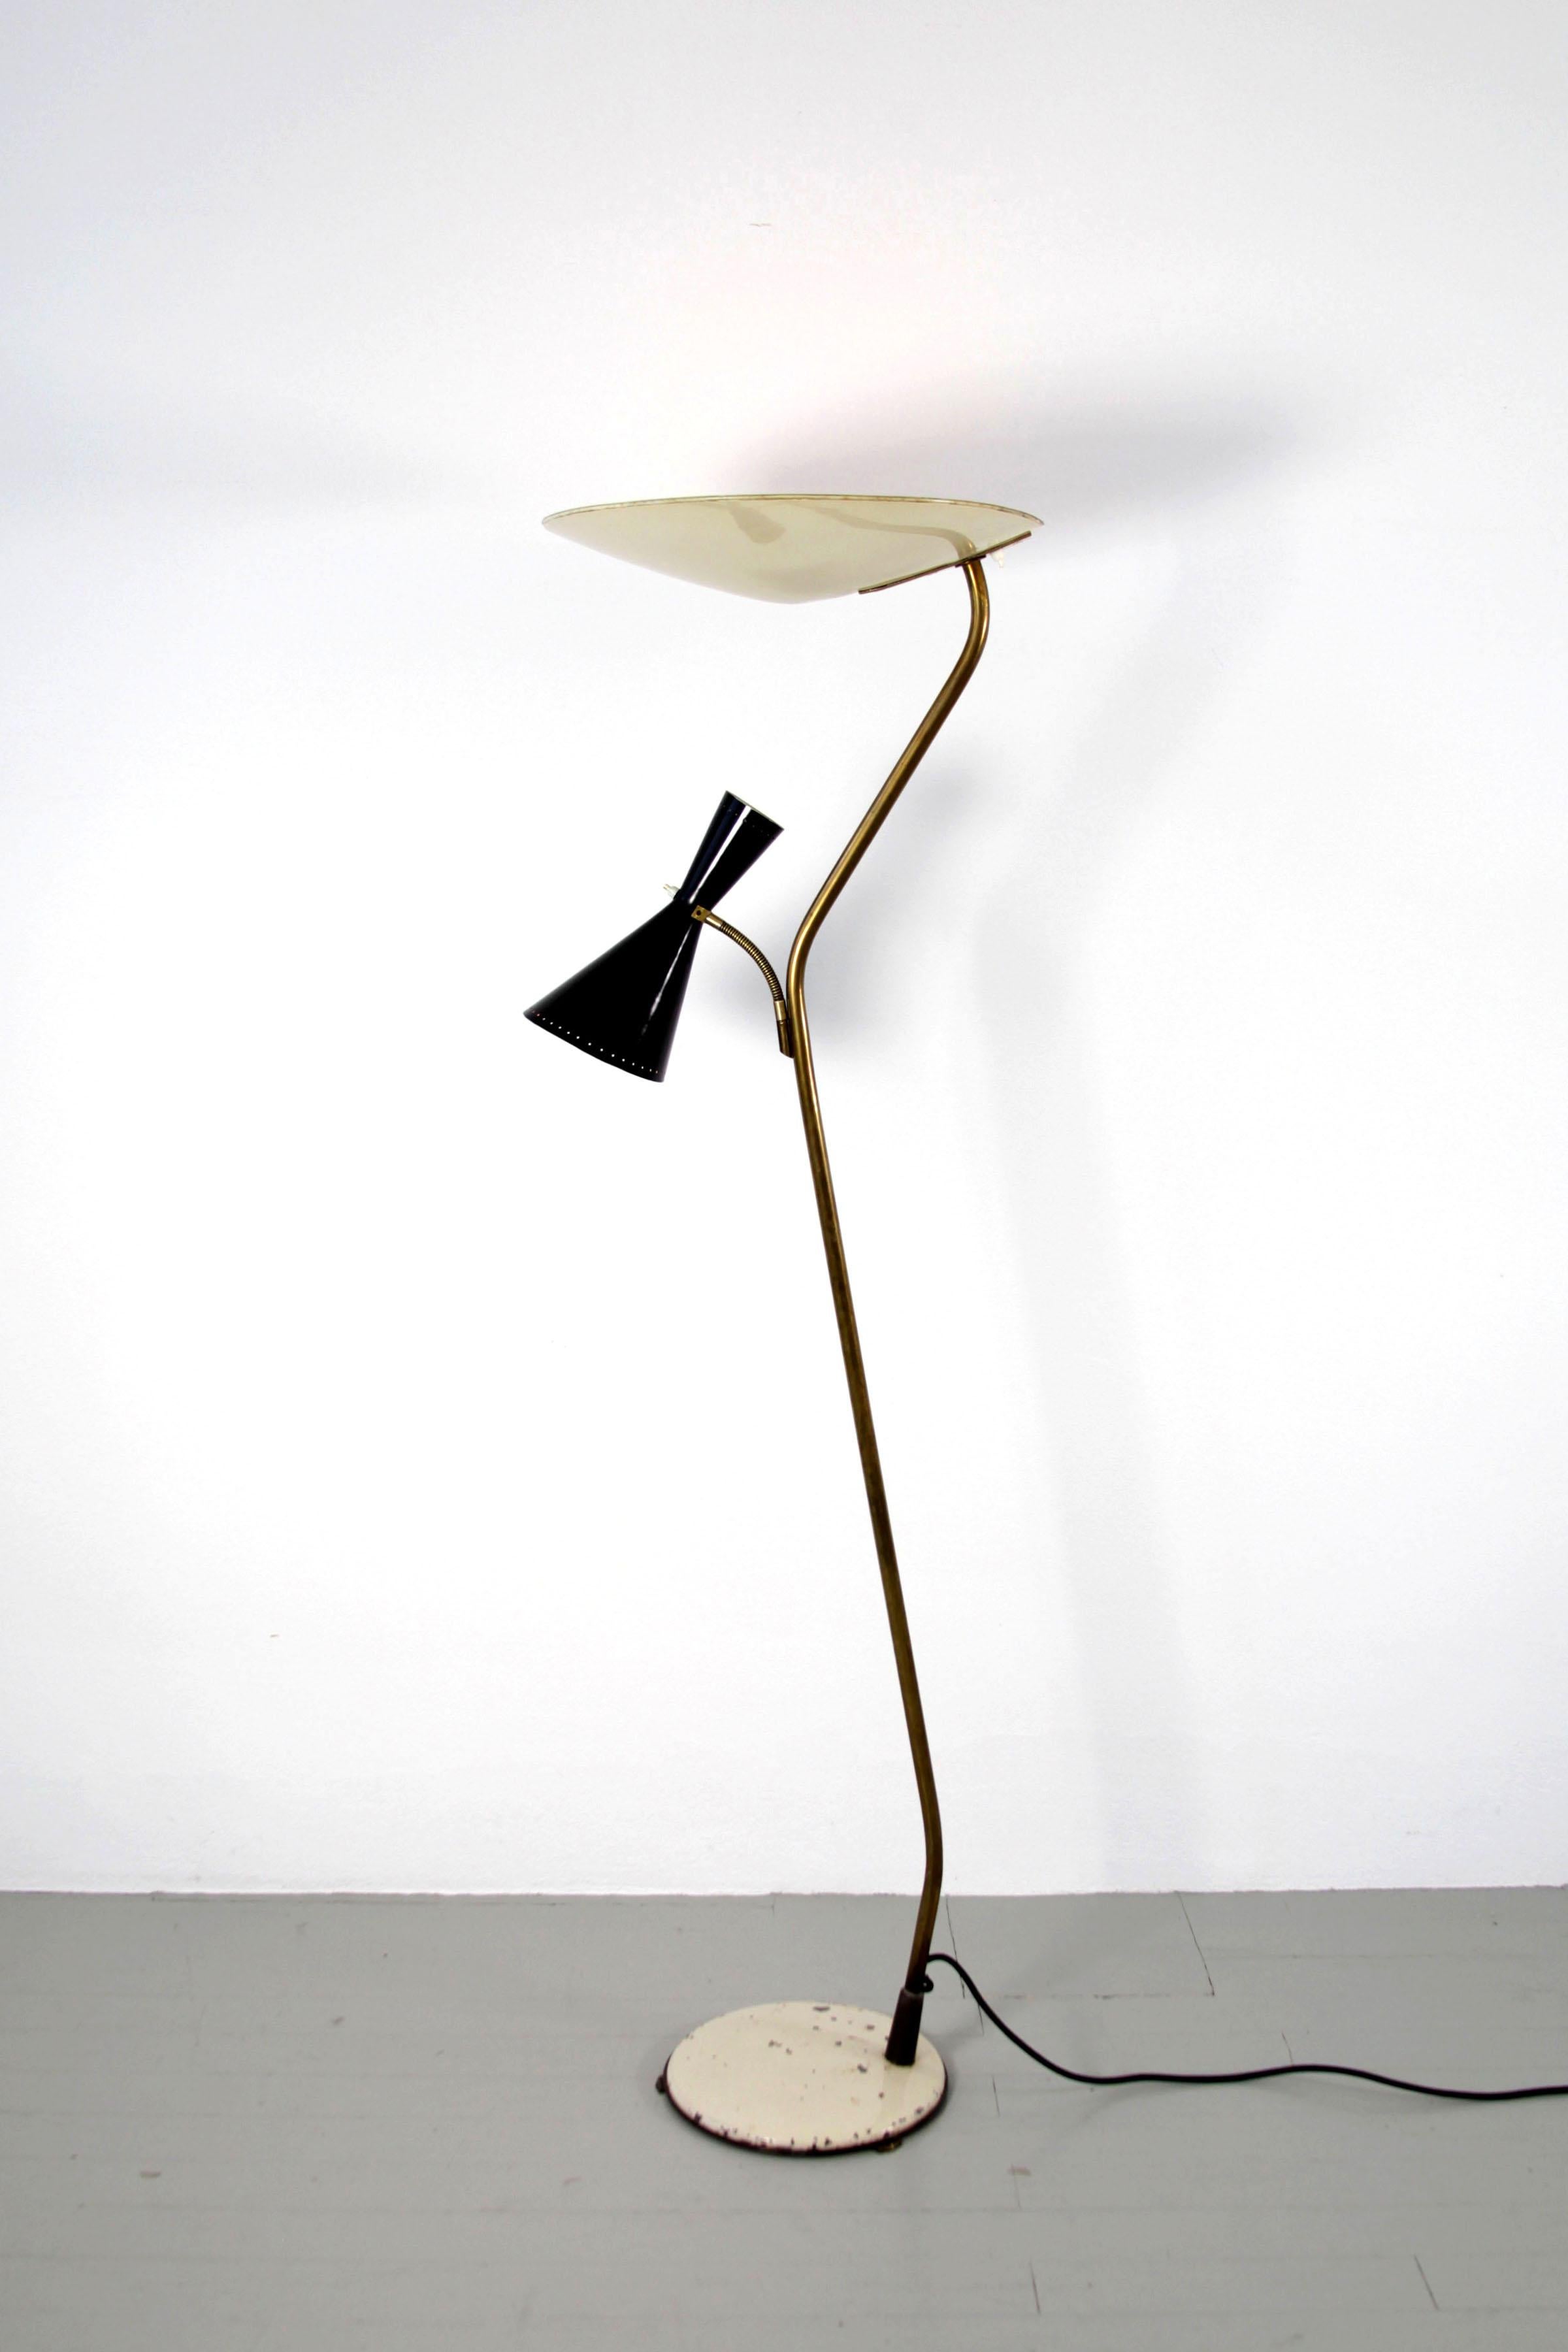 Mid-20th Century Floor Lamp with Lacquered Metal Shades, by Eberth Zürich, Switzerland, 1950s For Sale